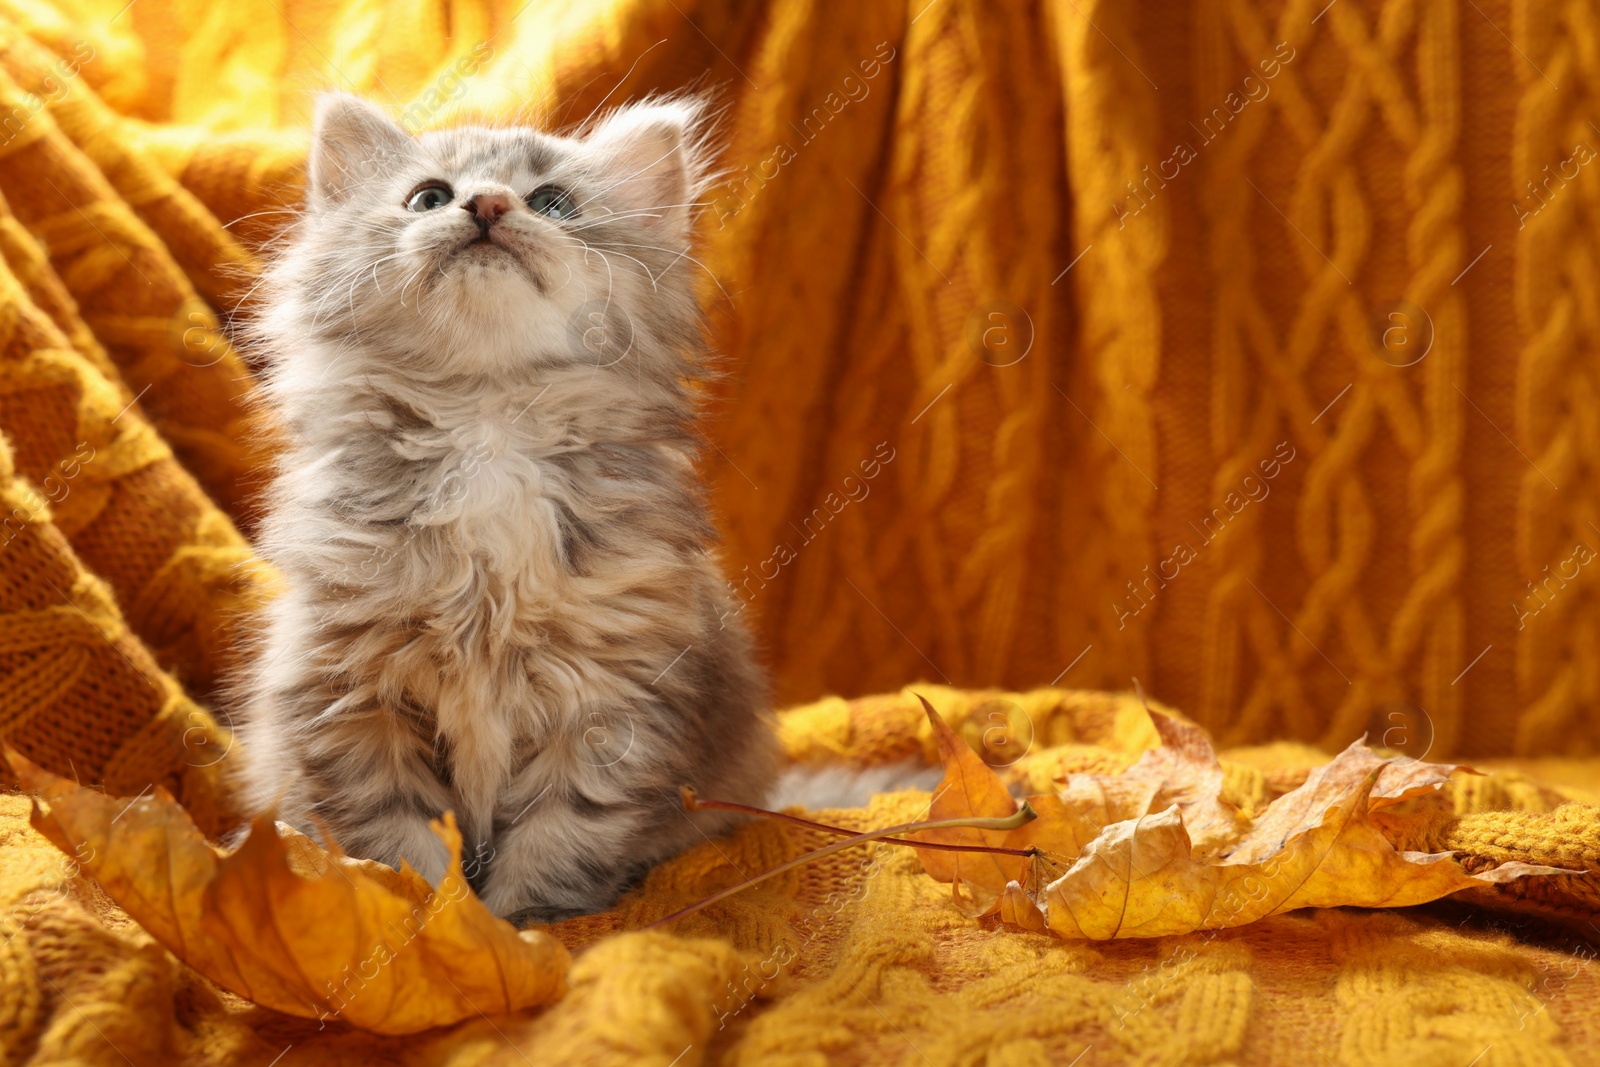 Photo of Cute kitten and autumn leaves on orange knitted blanket